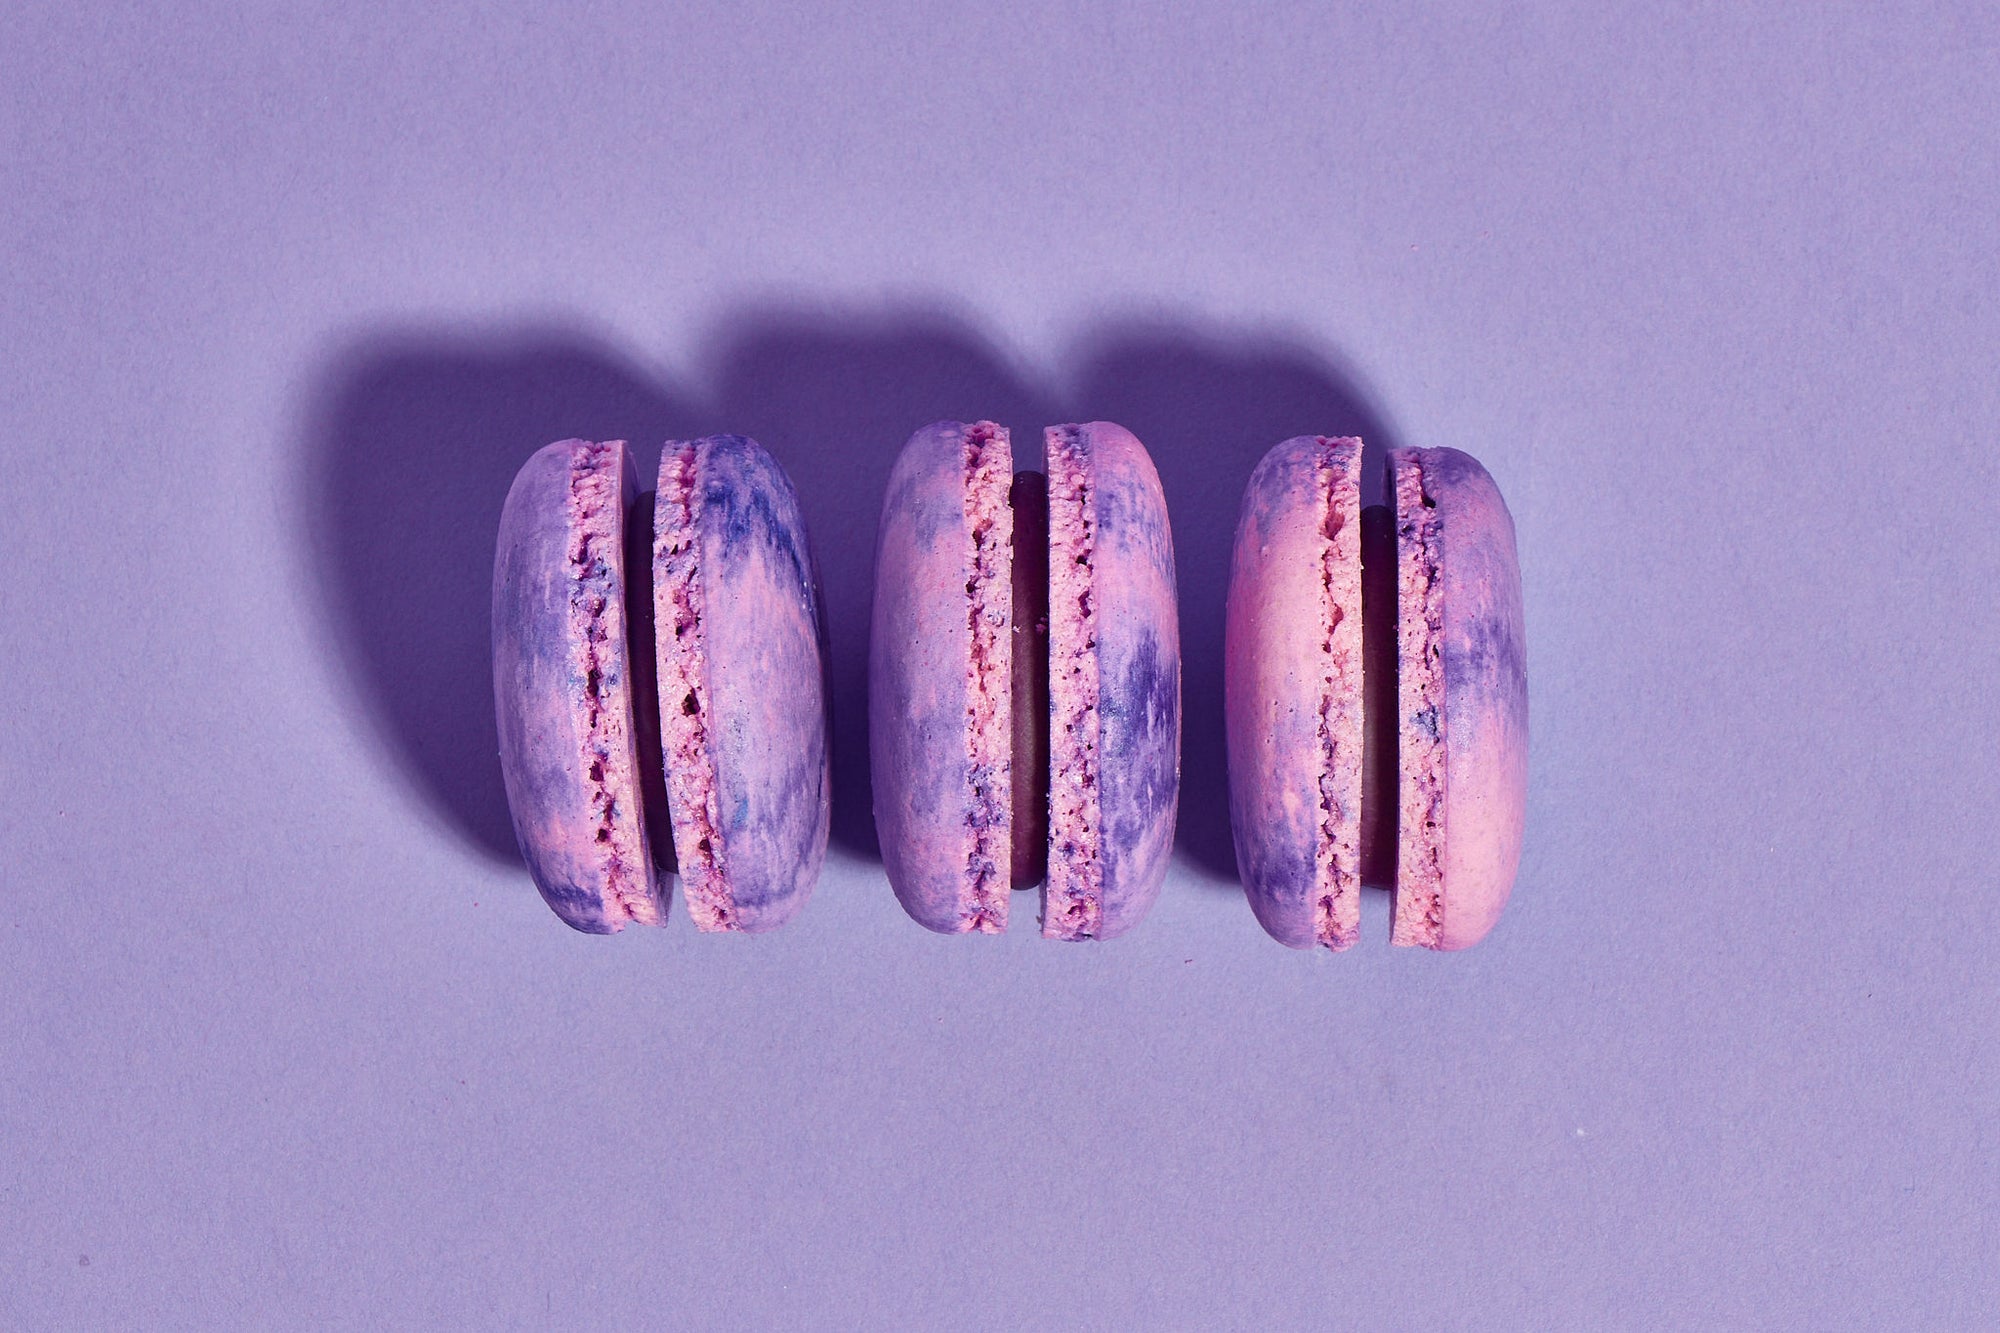 Three purple macarons lined up in a row